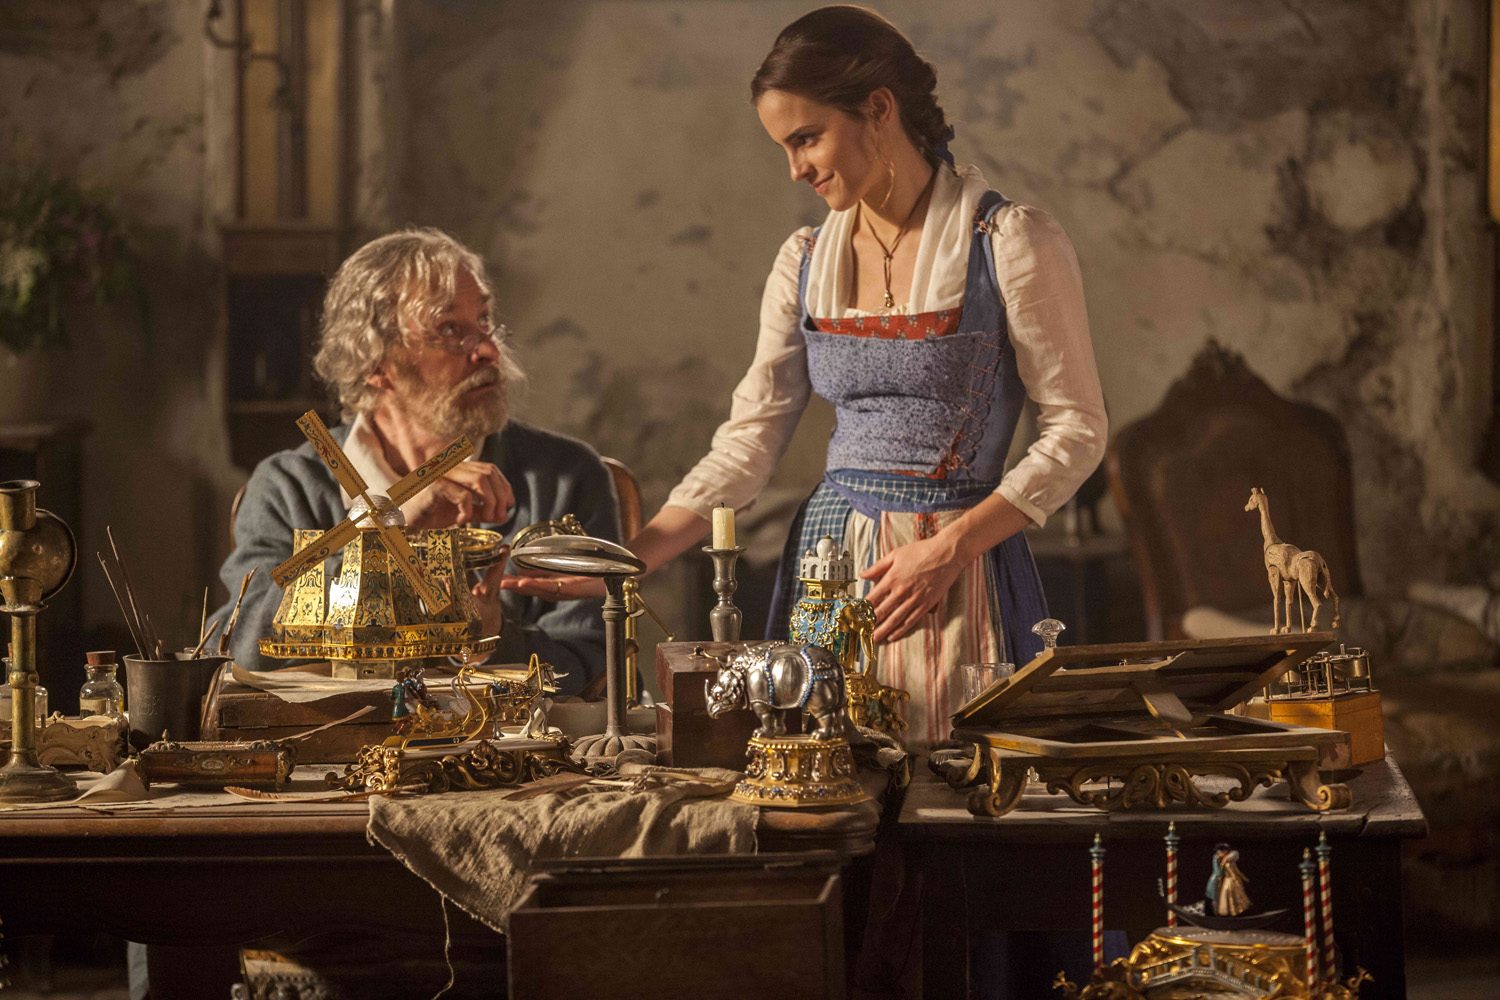 LISTEN: Emma Watson sings ‘Something There’ from ‘Beauty and the Beast’